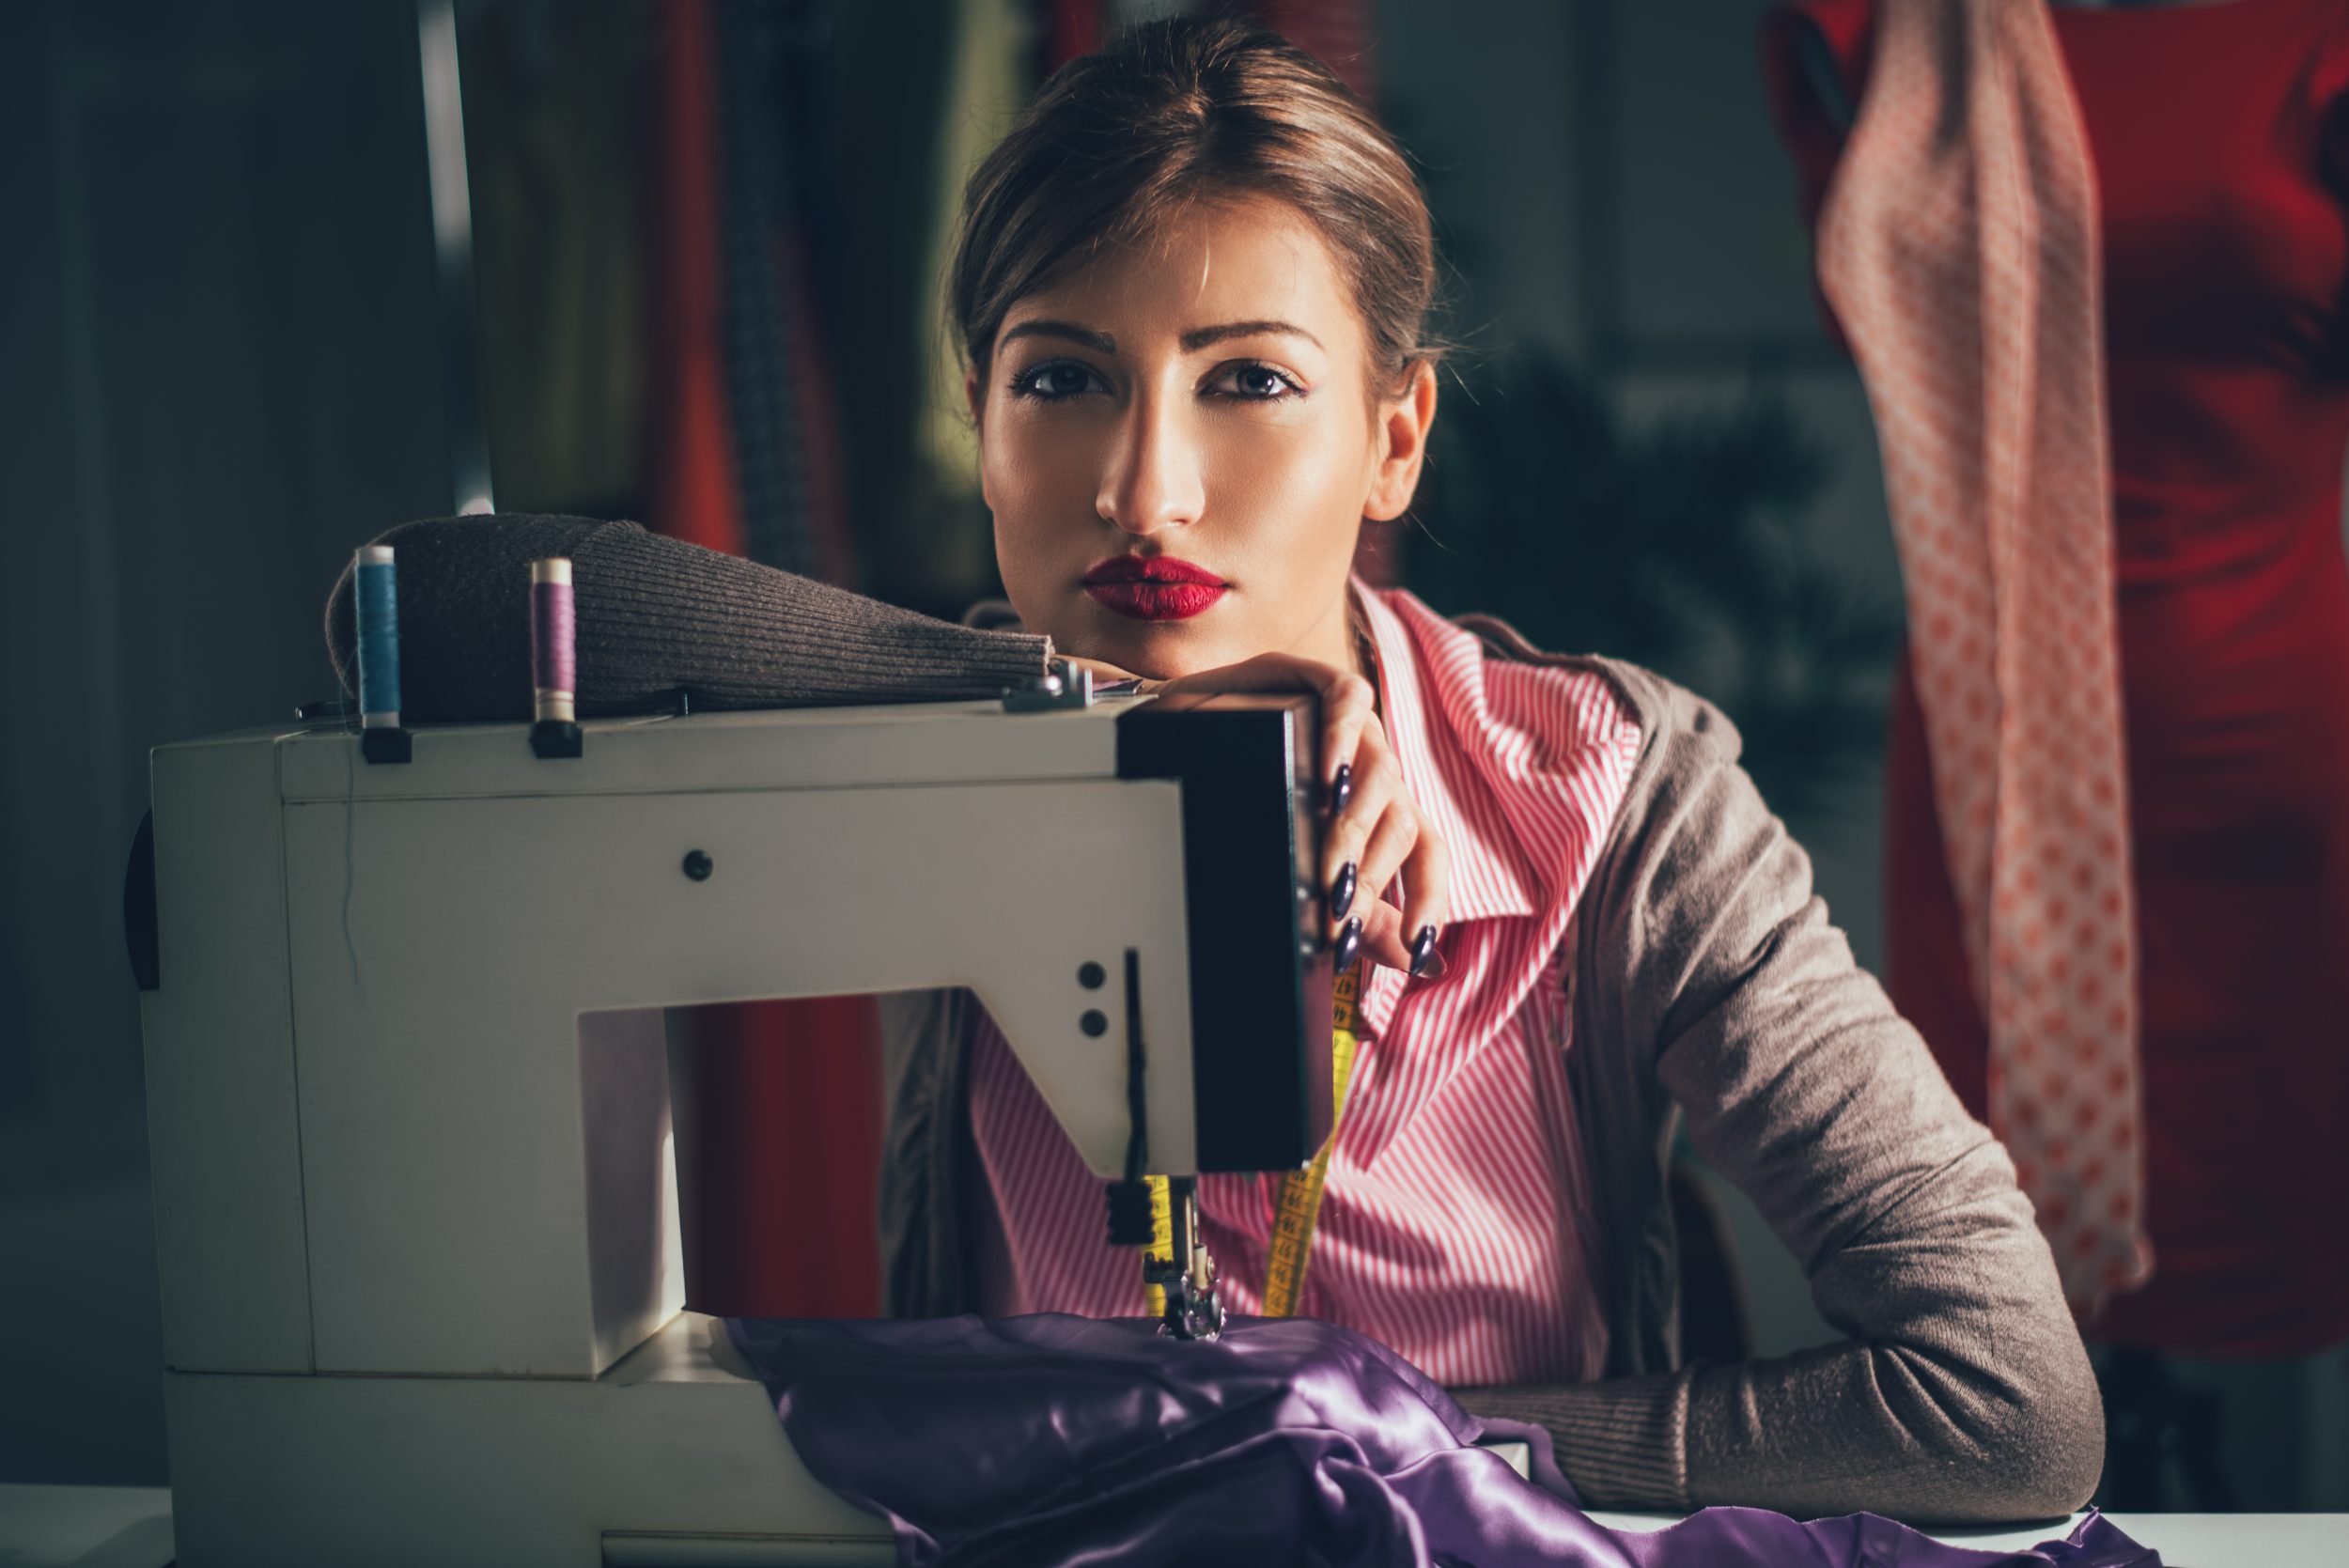 woman sits in front of the sewing machine and thinking.